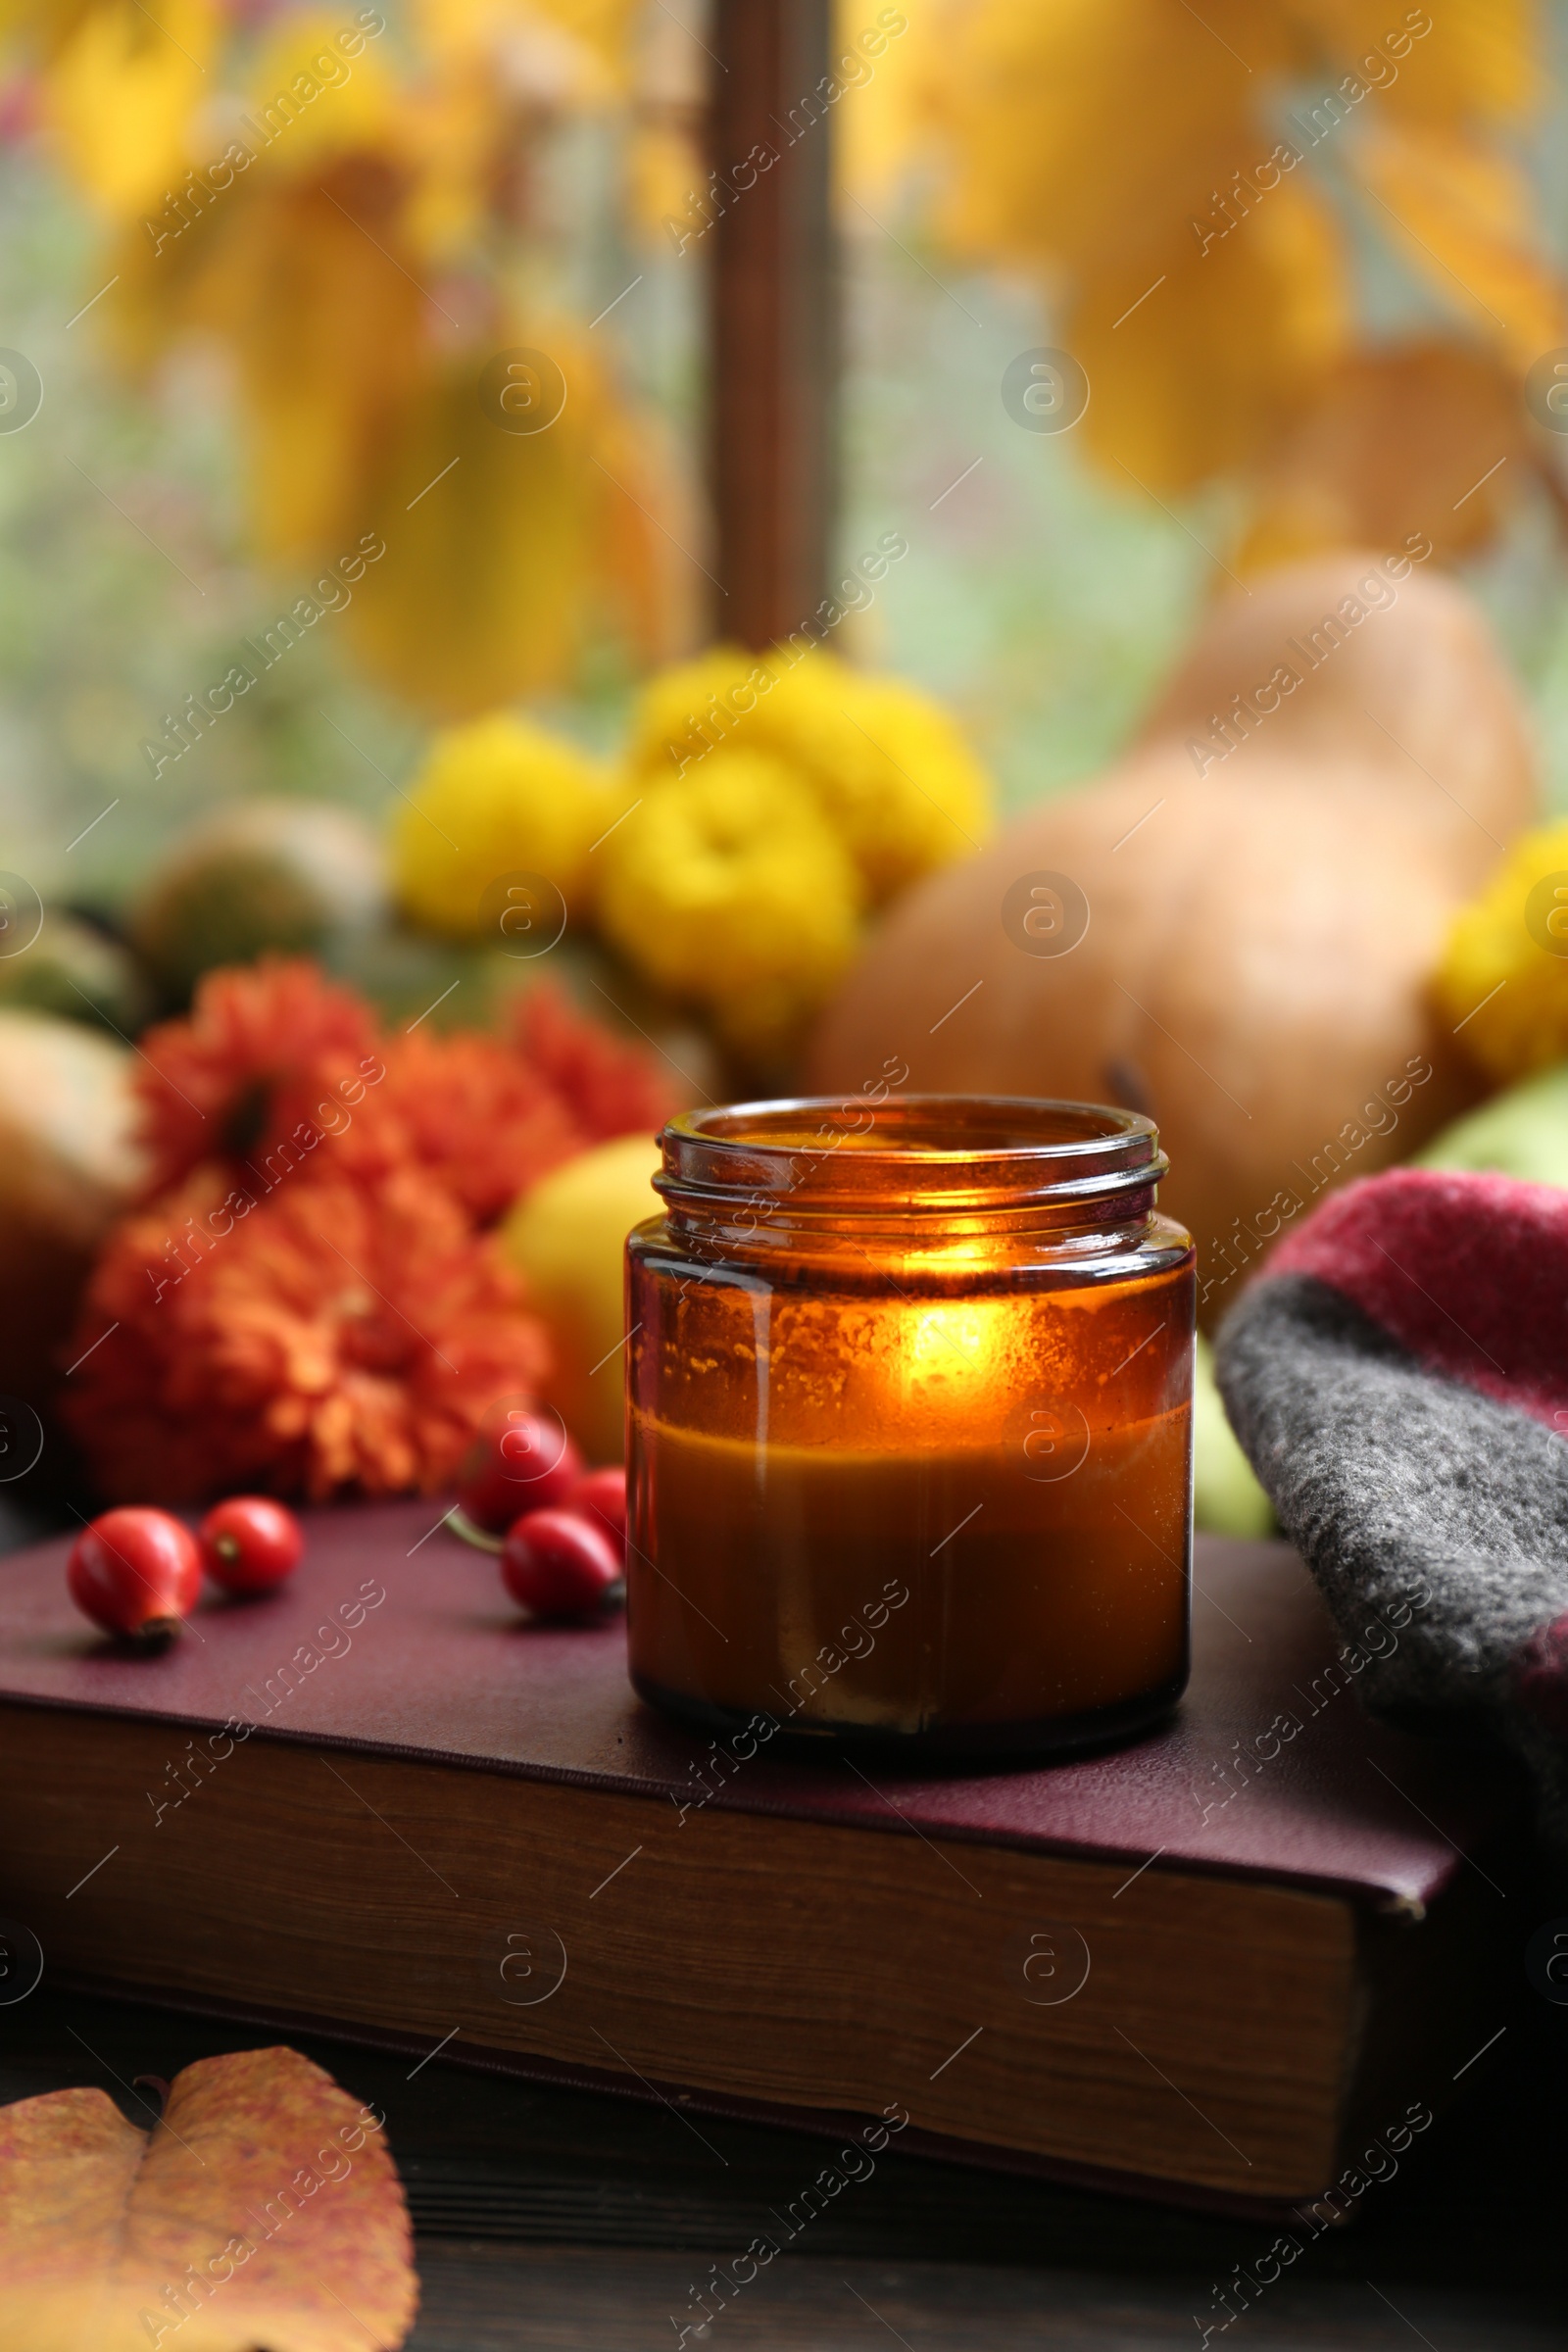 Photo of Burning scented candle on book, space for text. Autumn season